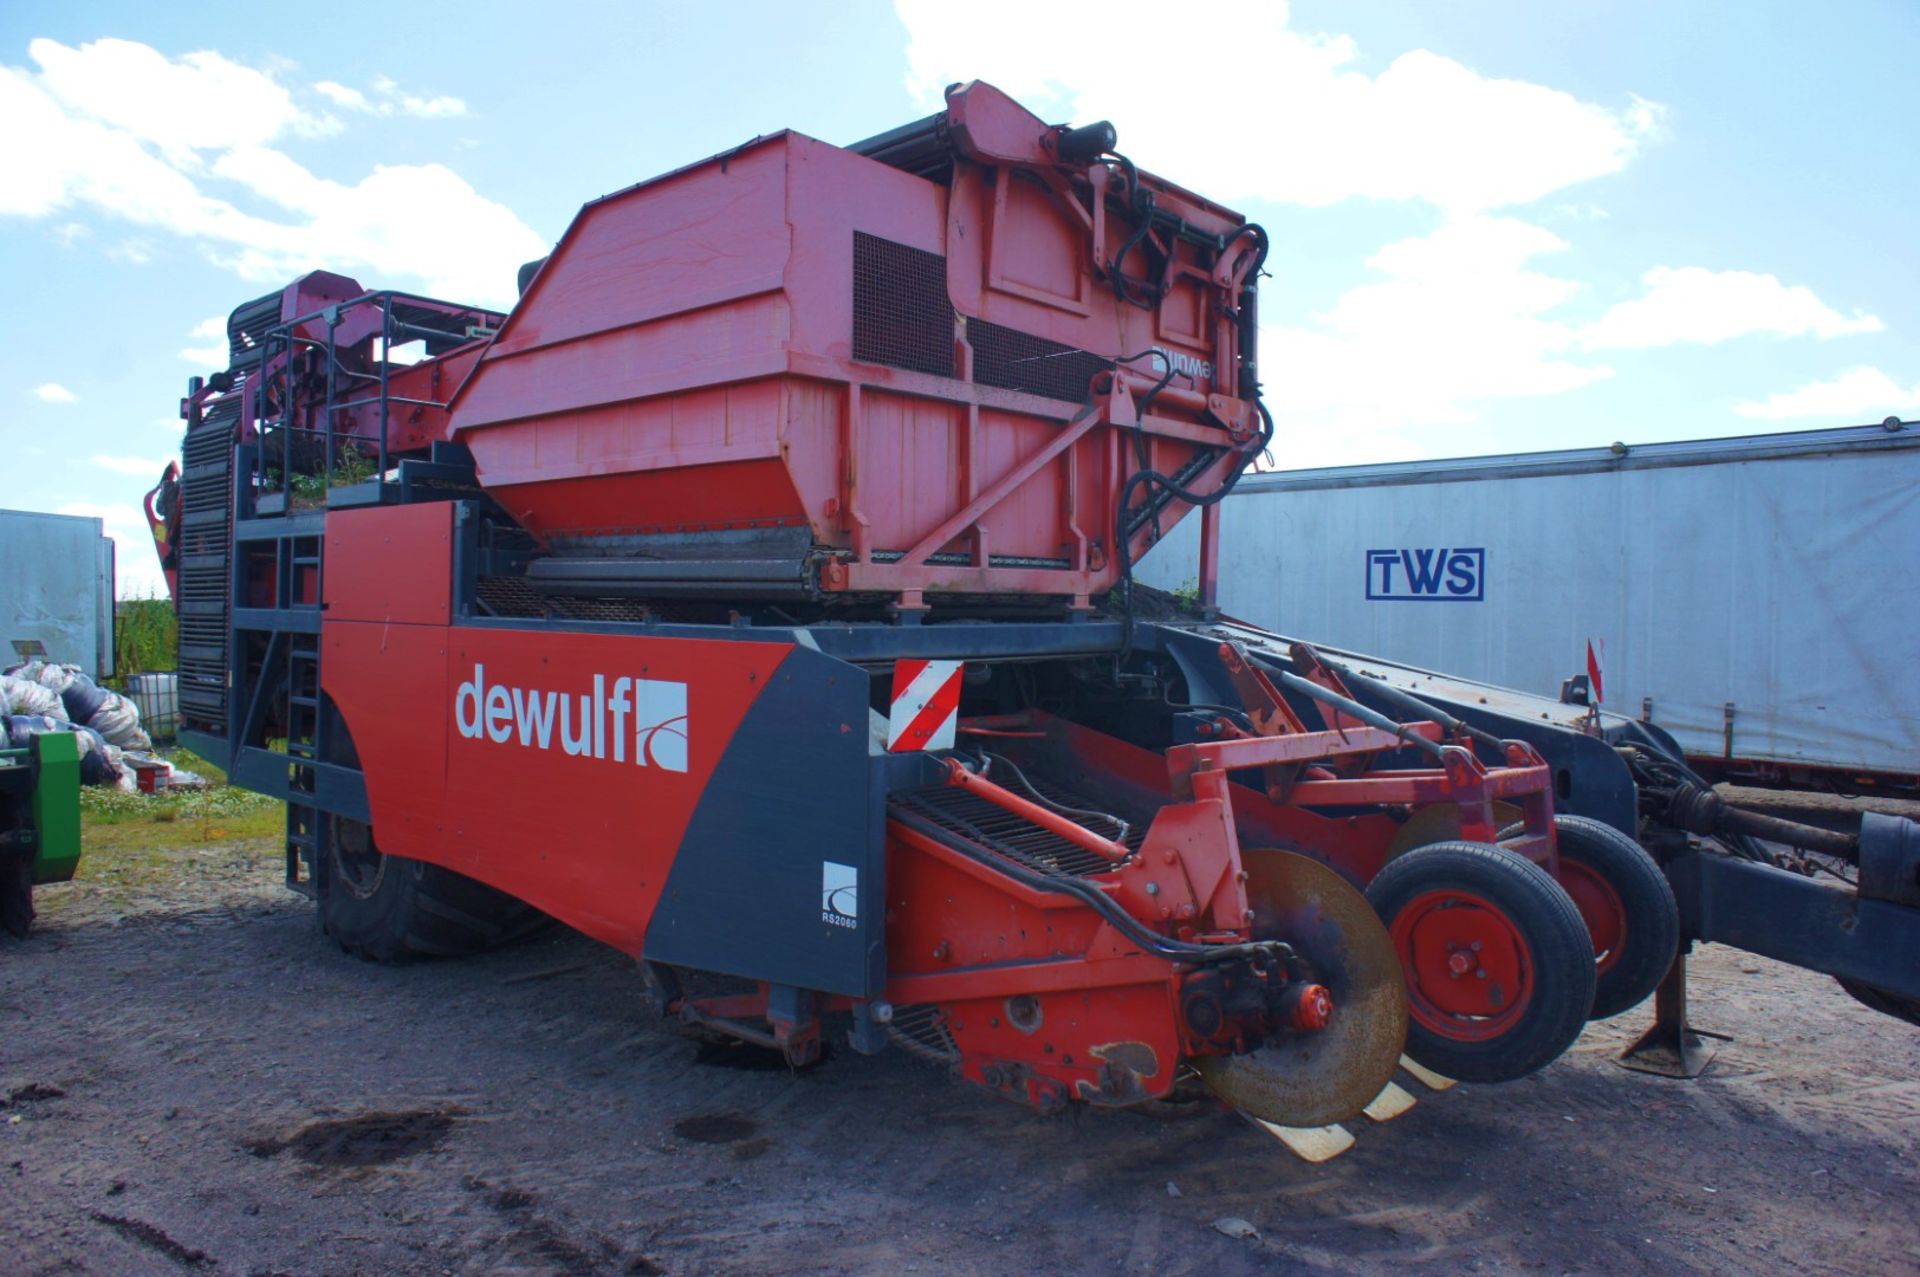 Dewulf RS2060 Trailed 2-Row Sieving Harvester, Serial Number 5811679, Year 2011 - Image 8 of 10